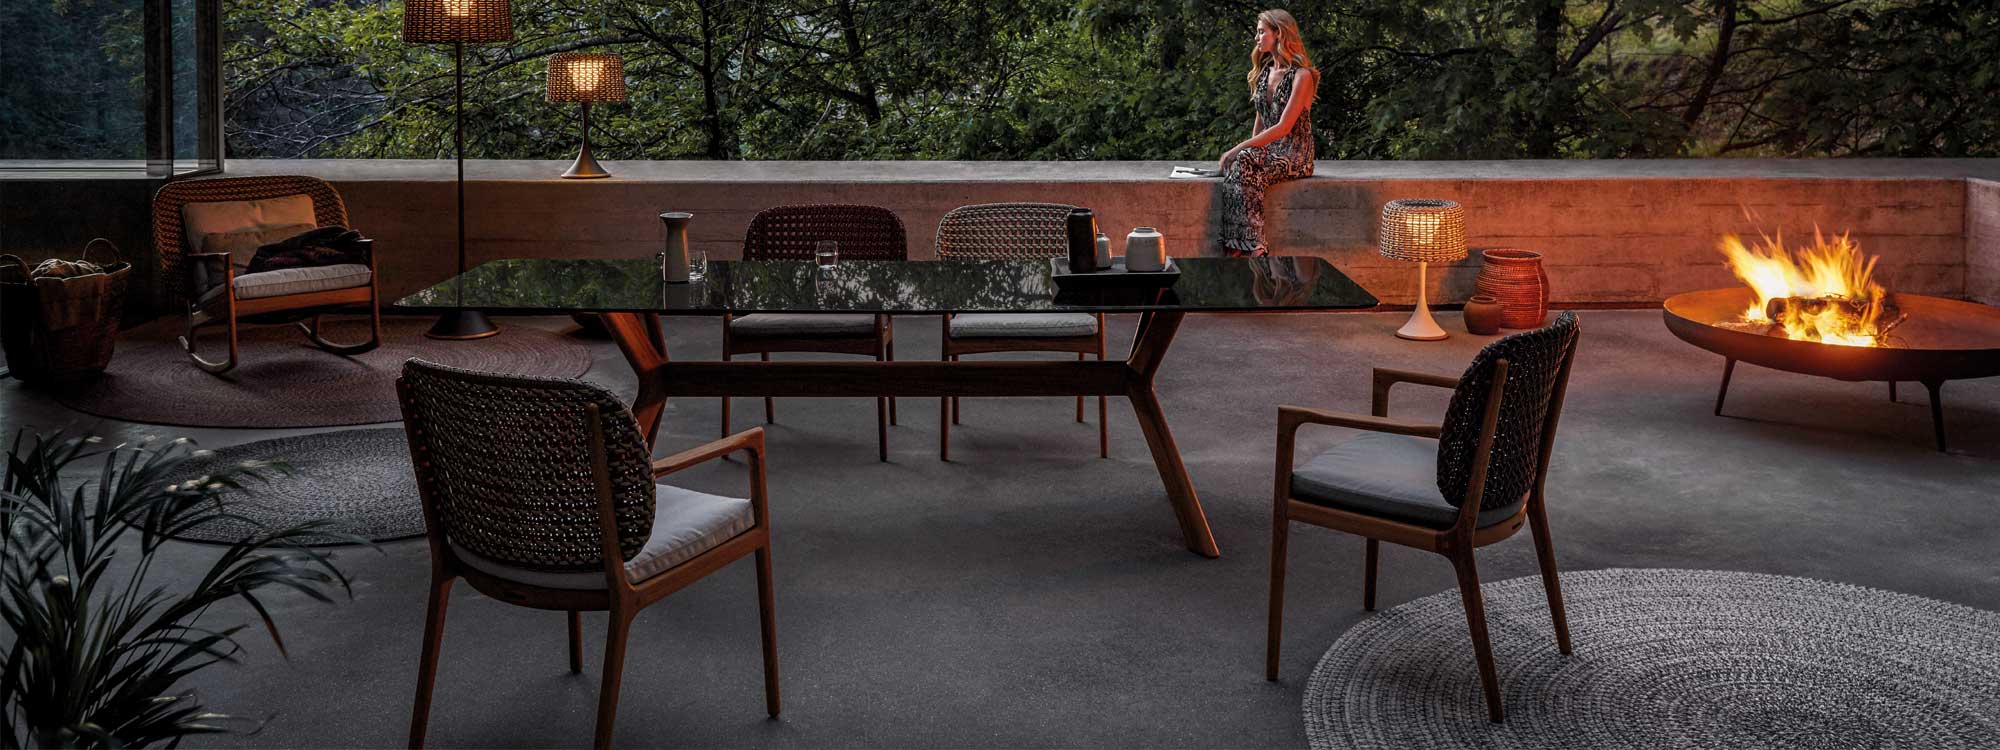 Image at dusk of Gloster Kay outdoor chairs on terrace, with flaming circular fire pit to the side.